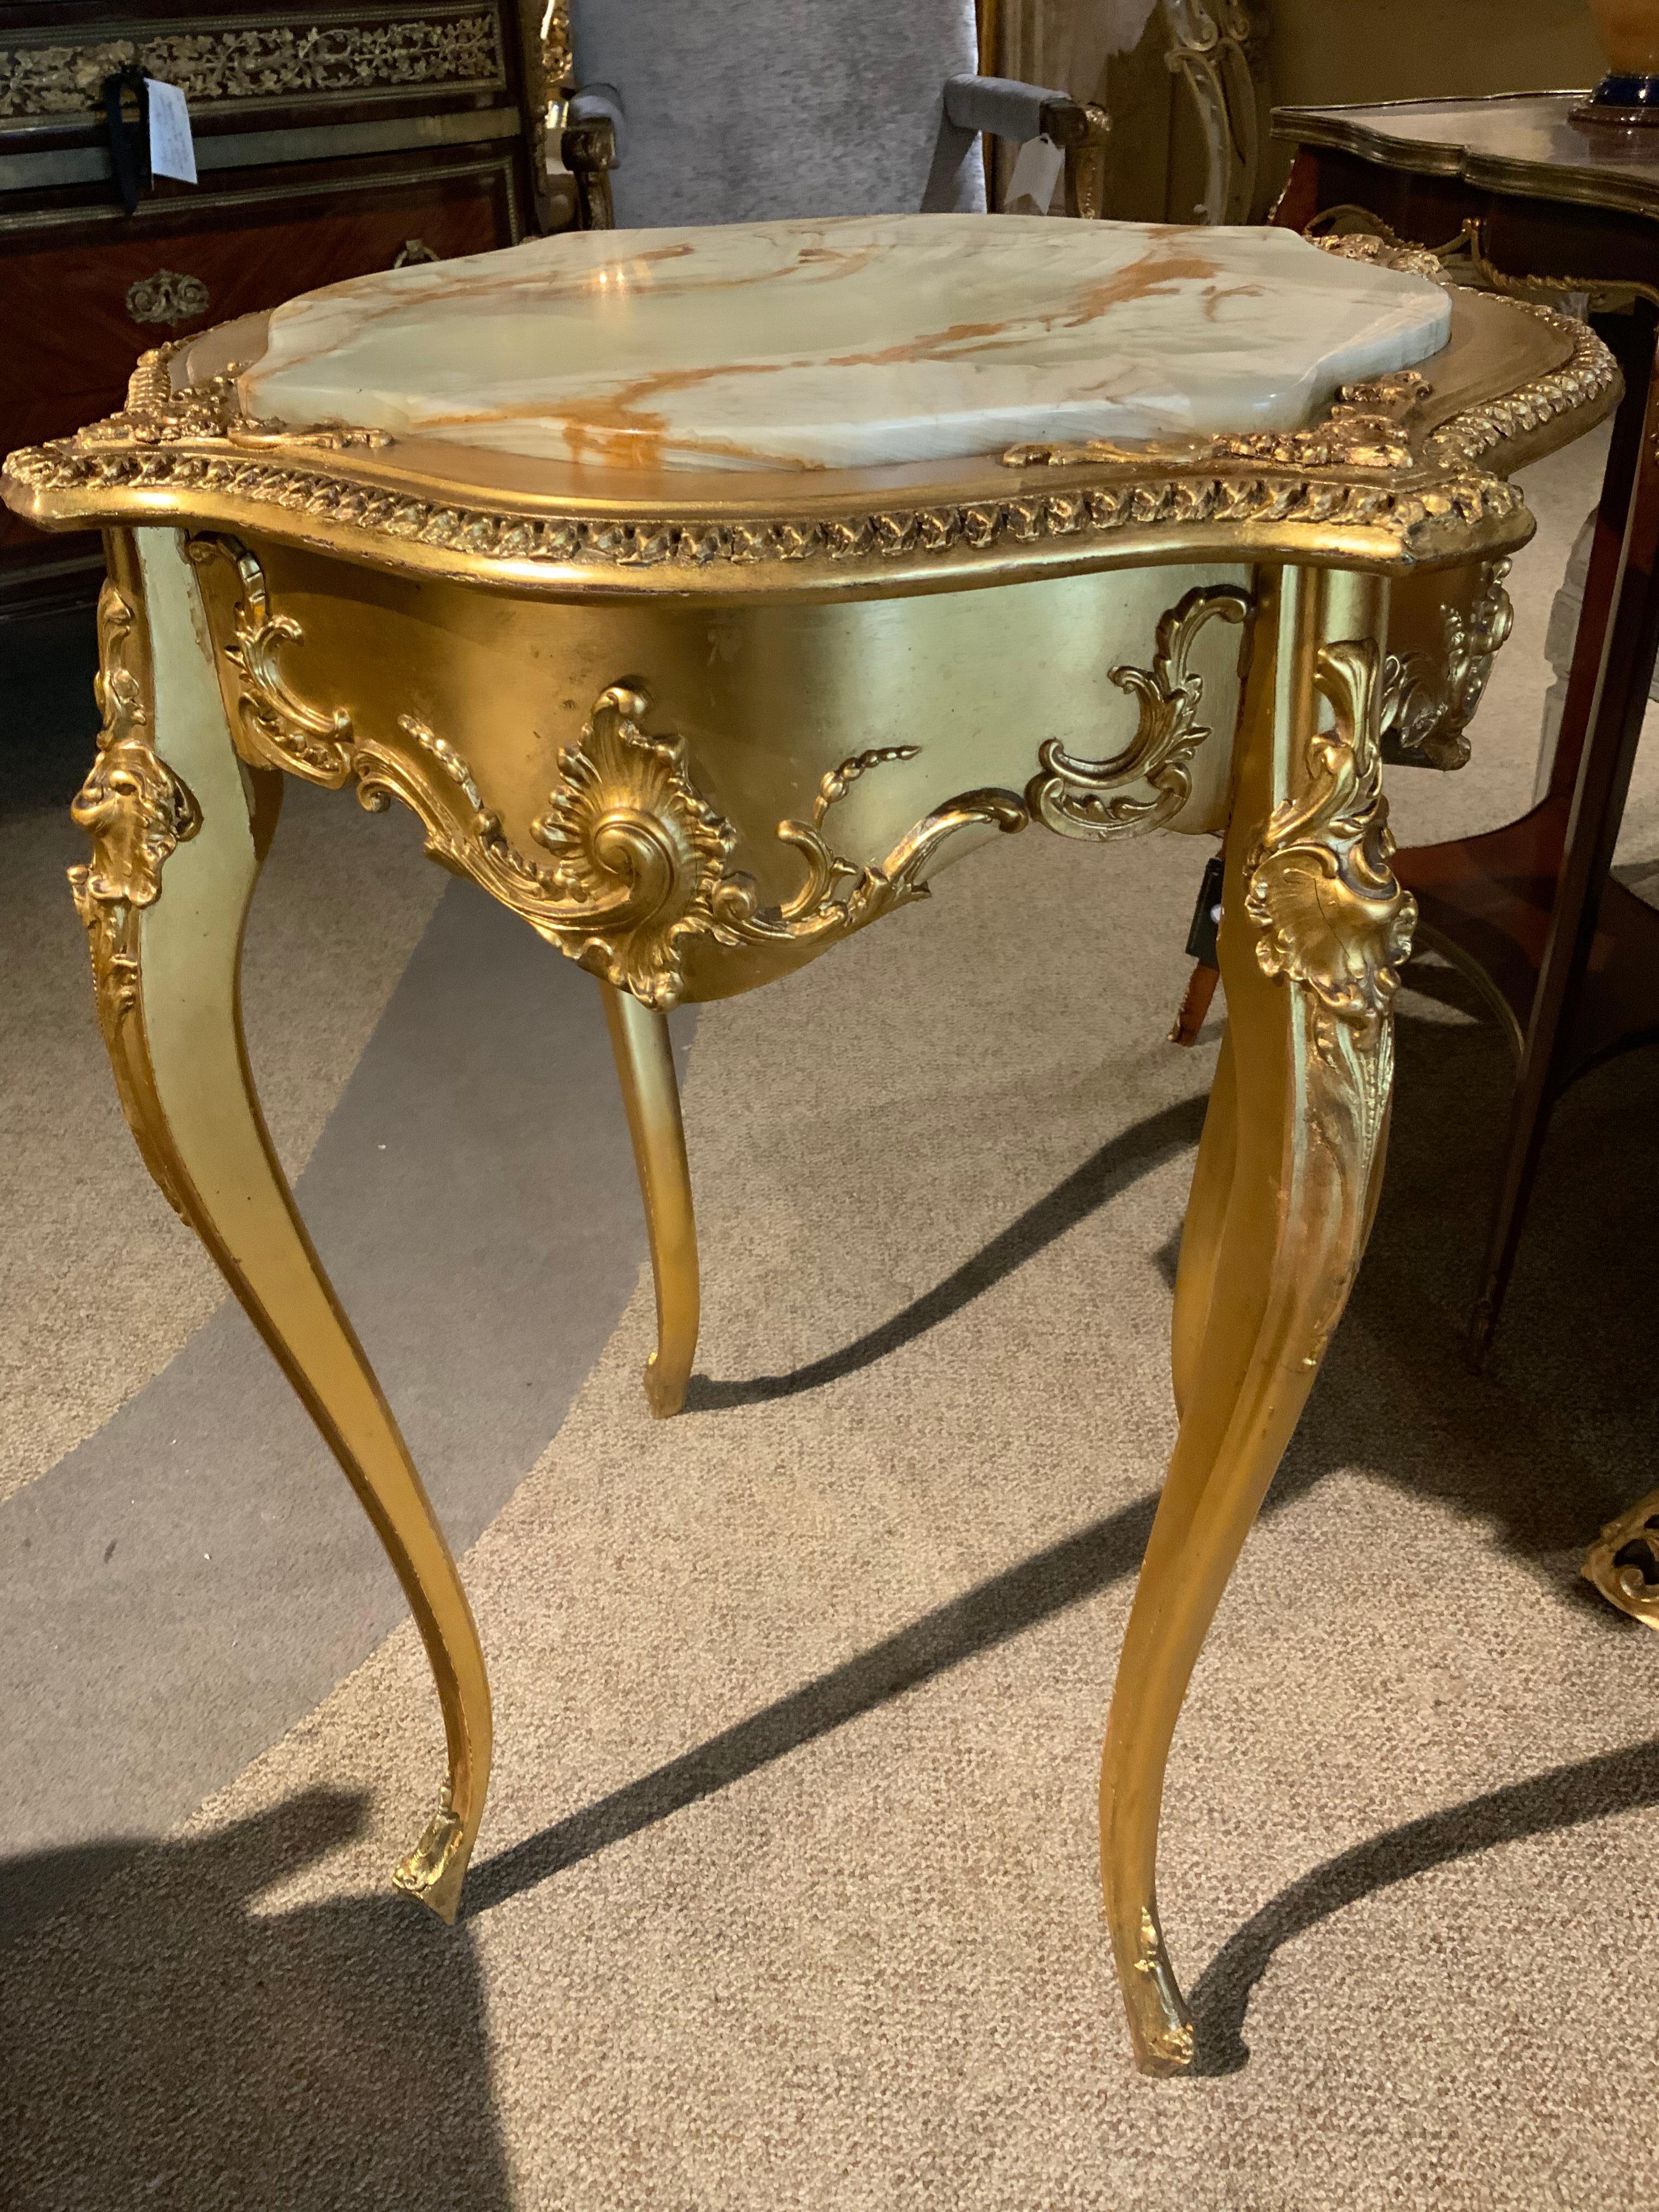 The gilding on this piece is exceptional in quality with a light
Patina and it is in beautiful condition. The shaping on this piece
Is superb with oval sides and the the top is a pale gold alabaster
That is inset into the table.  The legs are